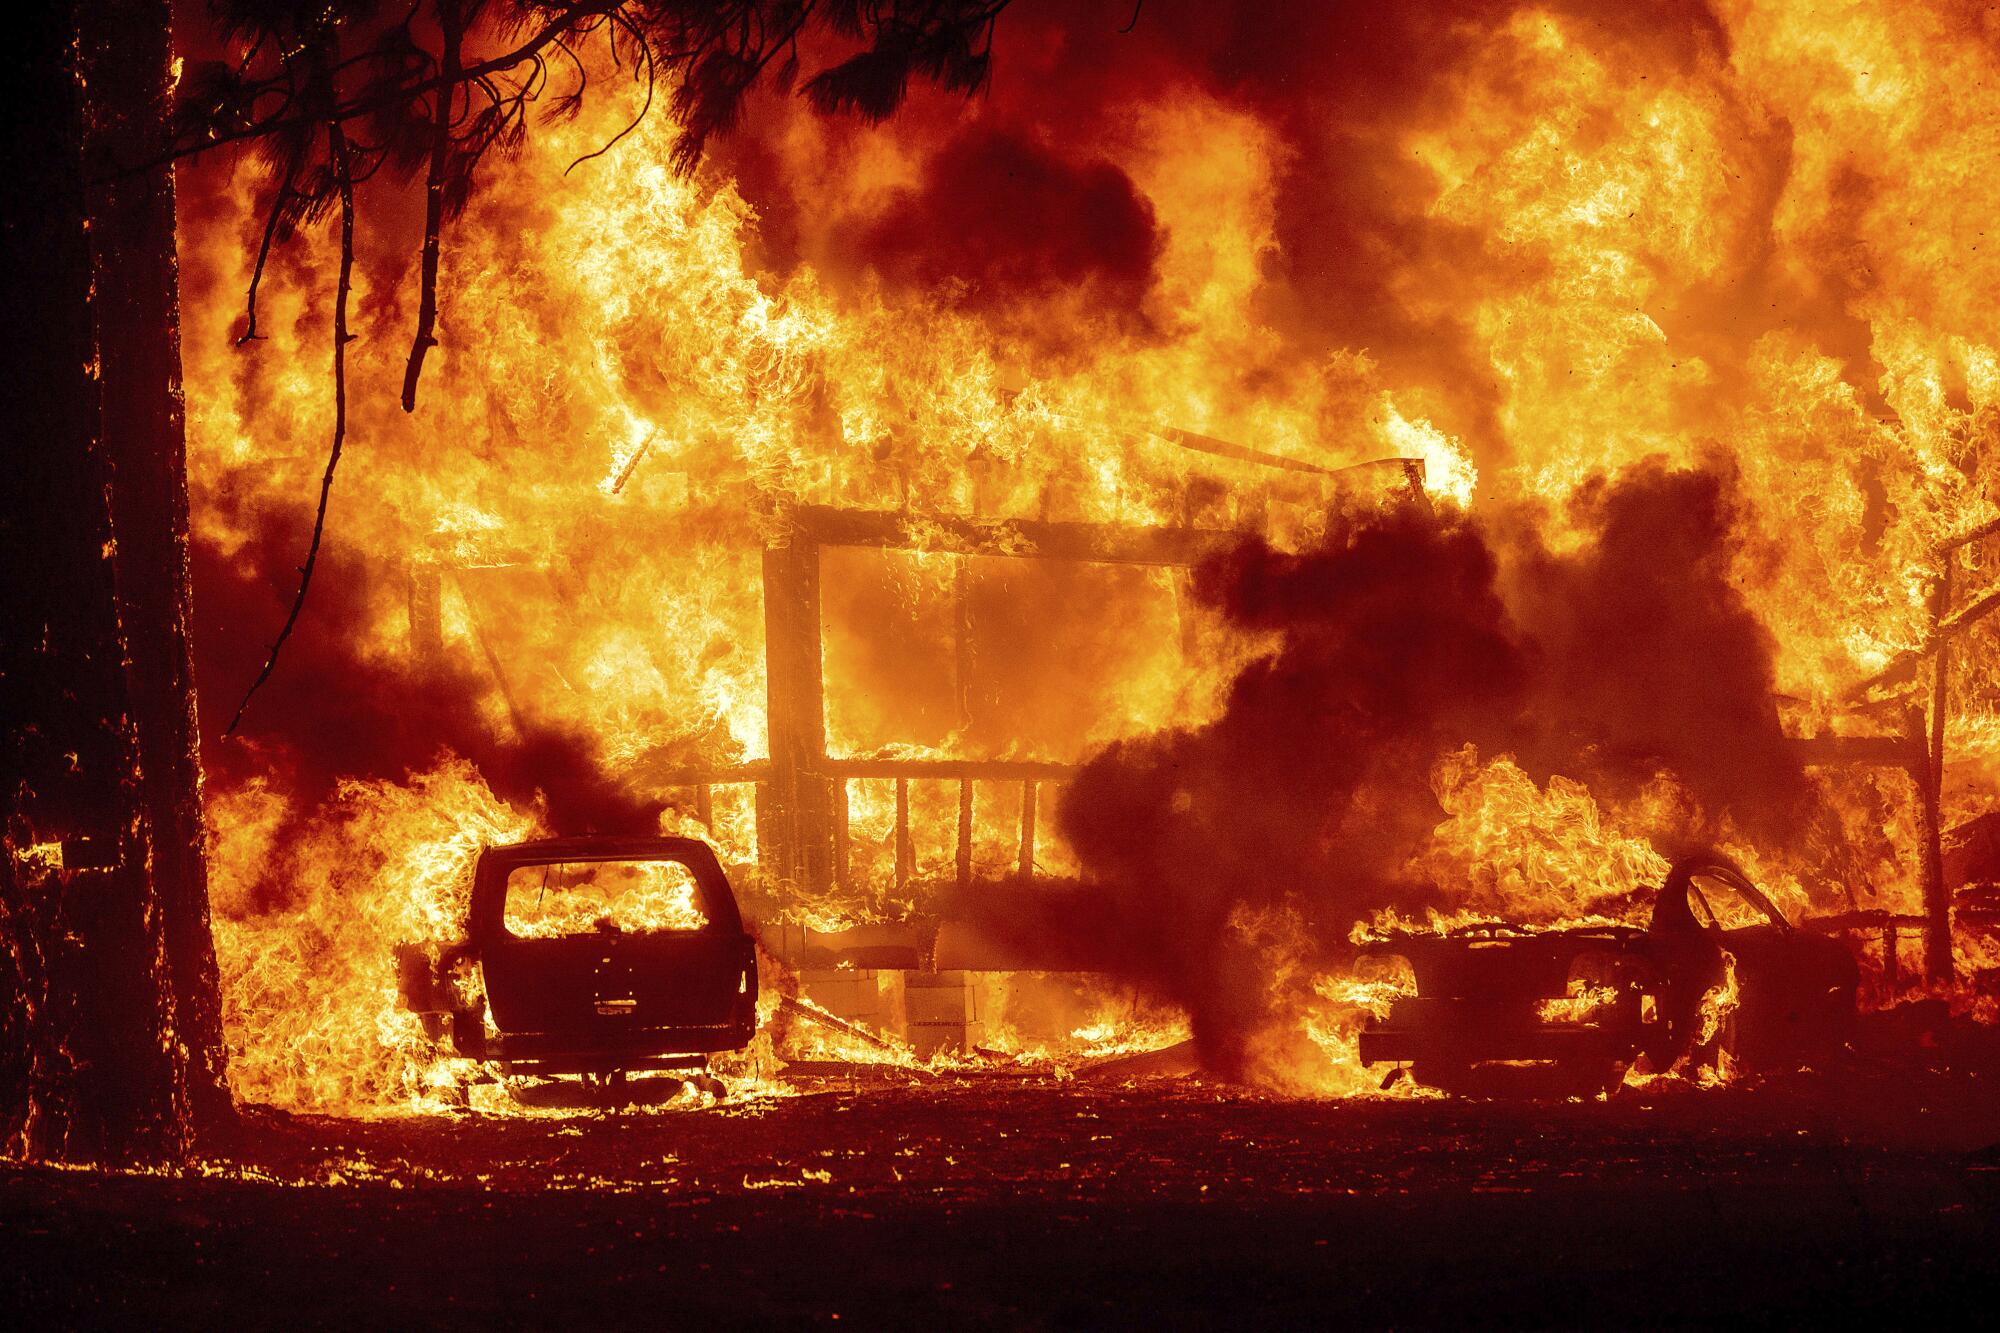 The outline of a home and a car are seen amid an inferno of flames.